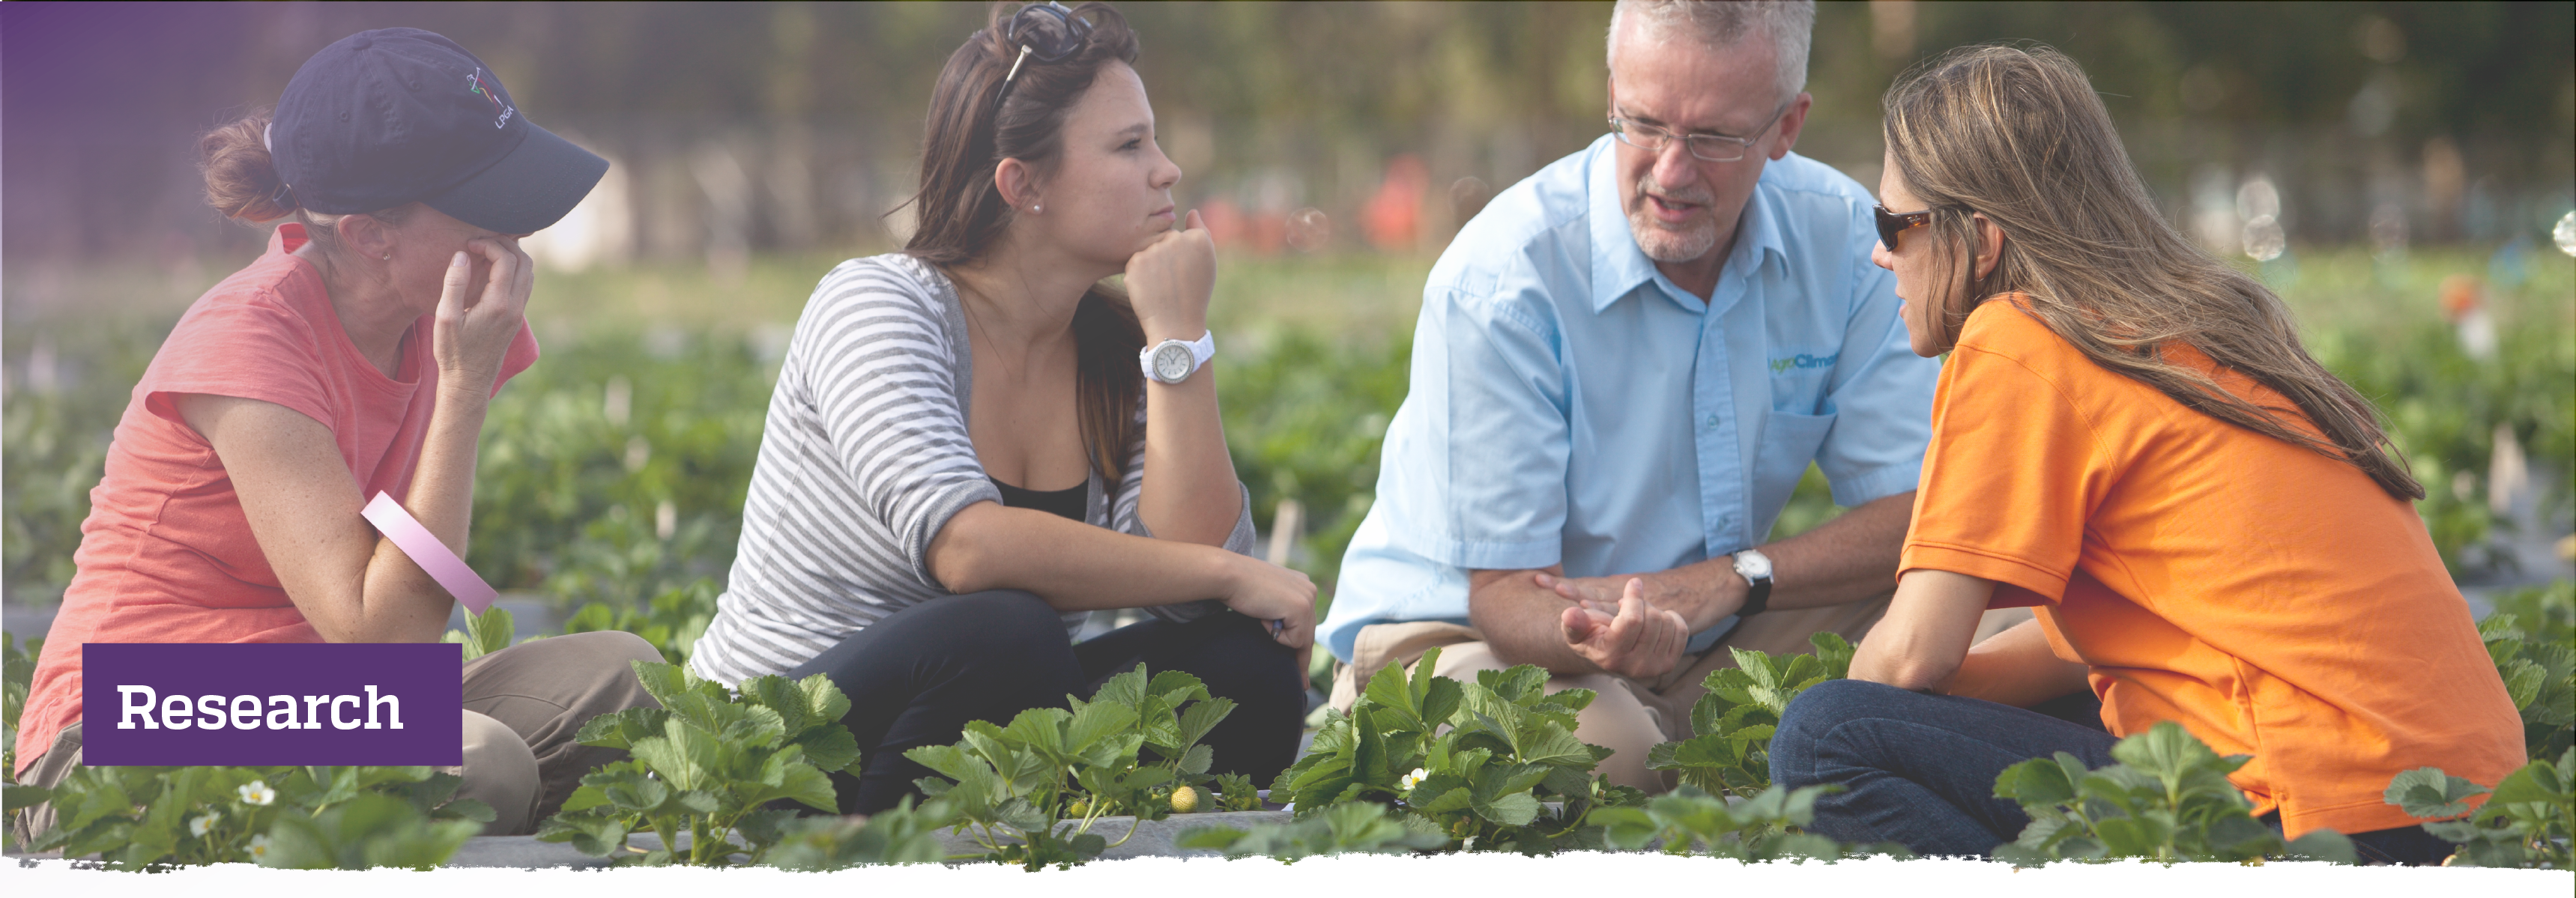 Research; Researchers and students in strawberry field